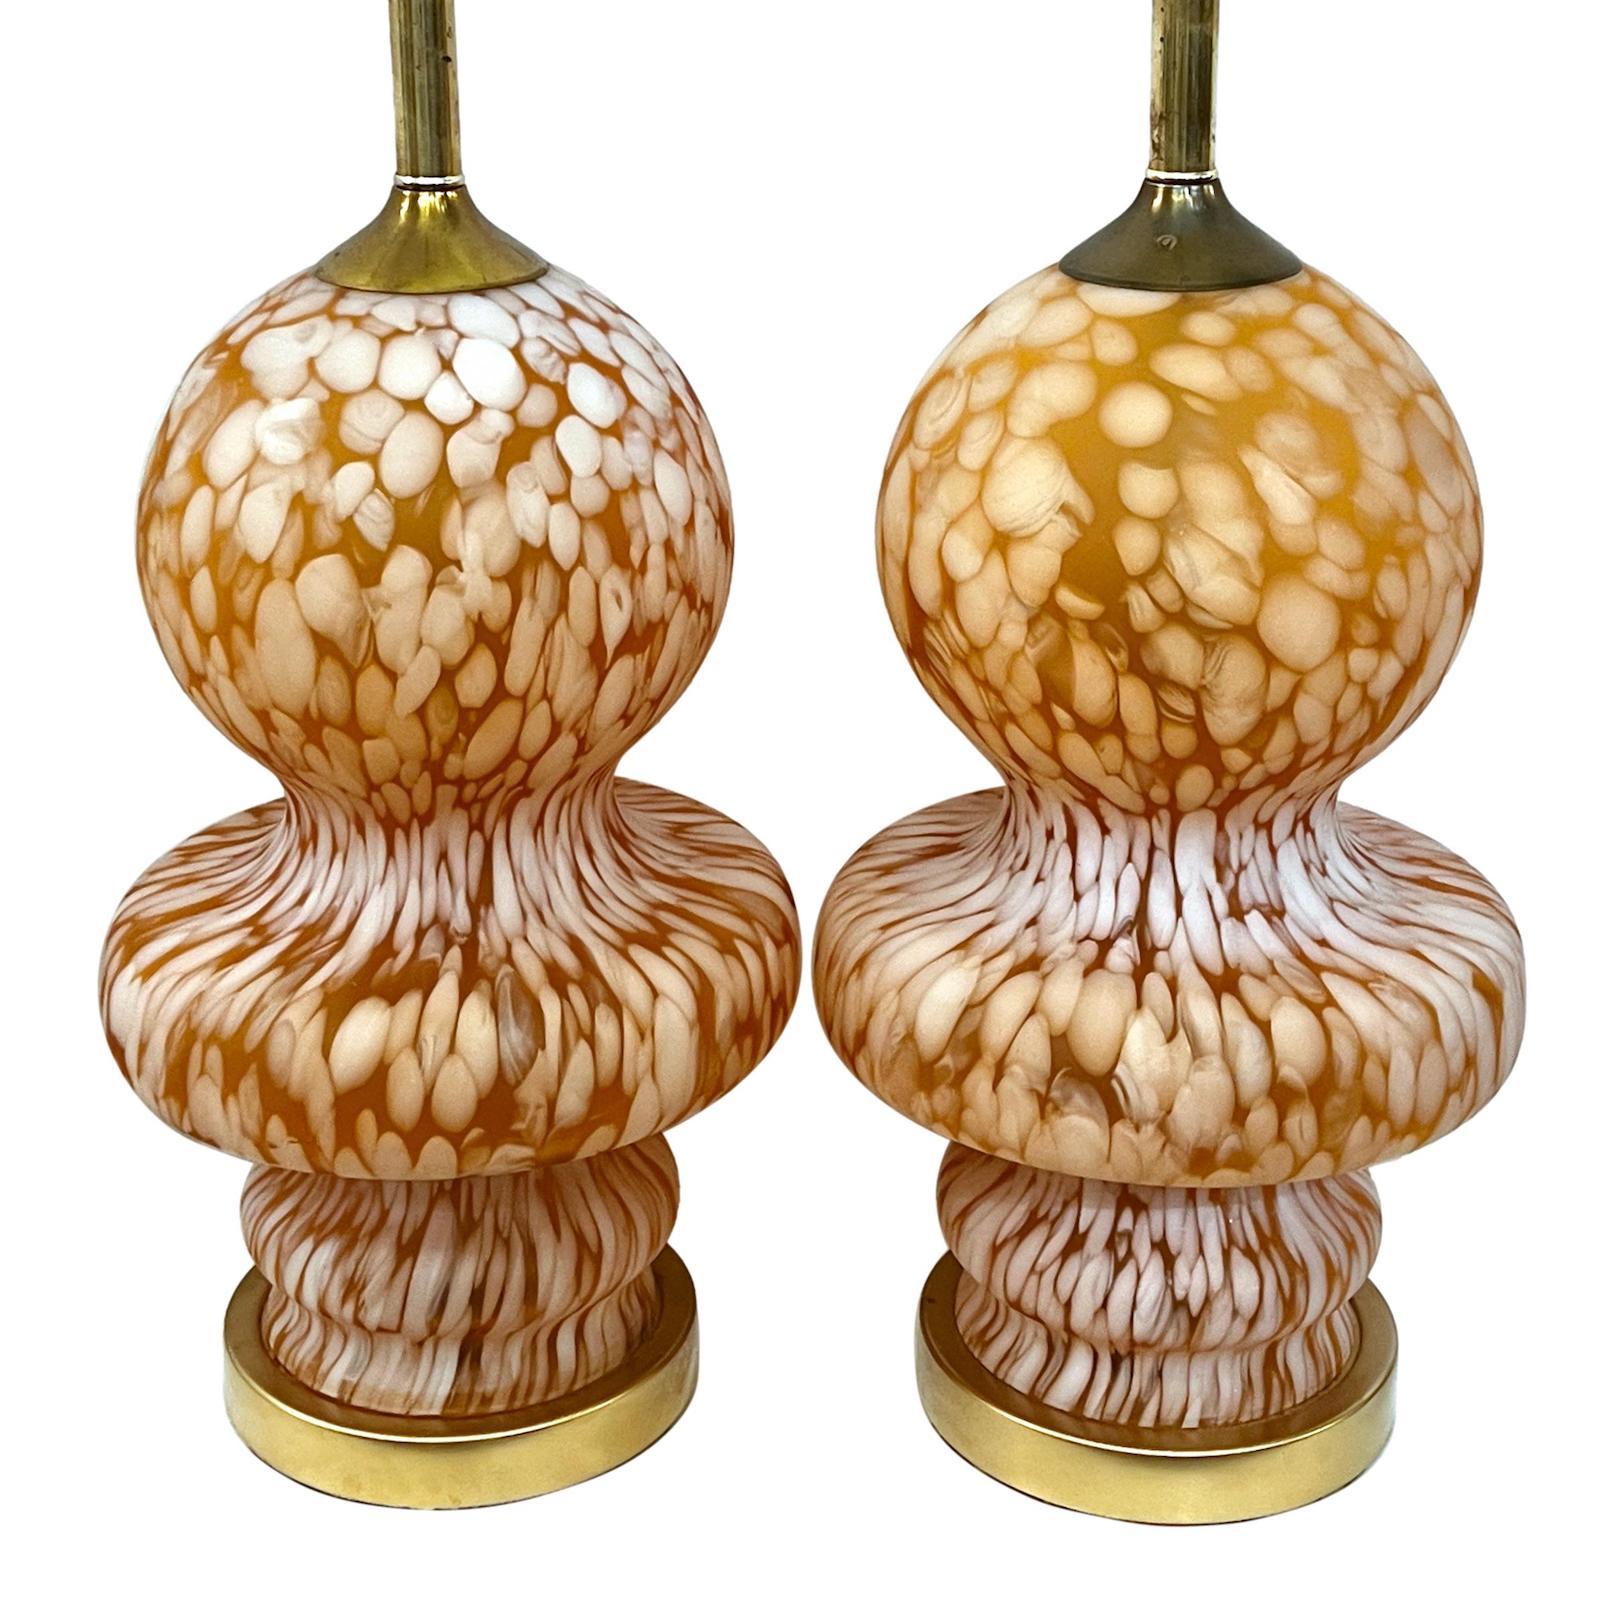 Pair of circa 1960s Italian blown art glass table lamps with gilt bases.

Measurements:
Height of body: 22